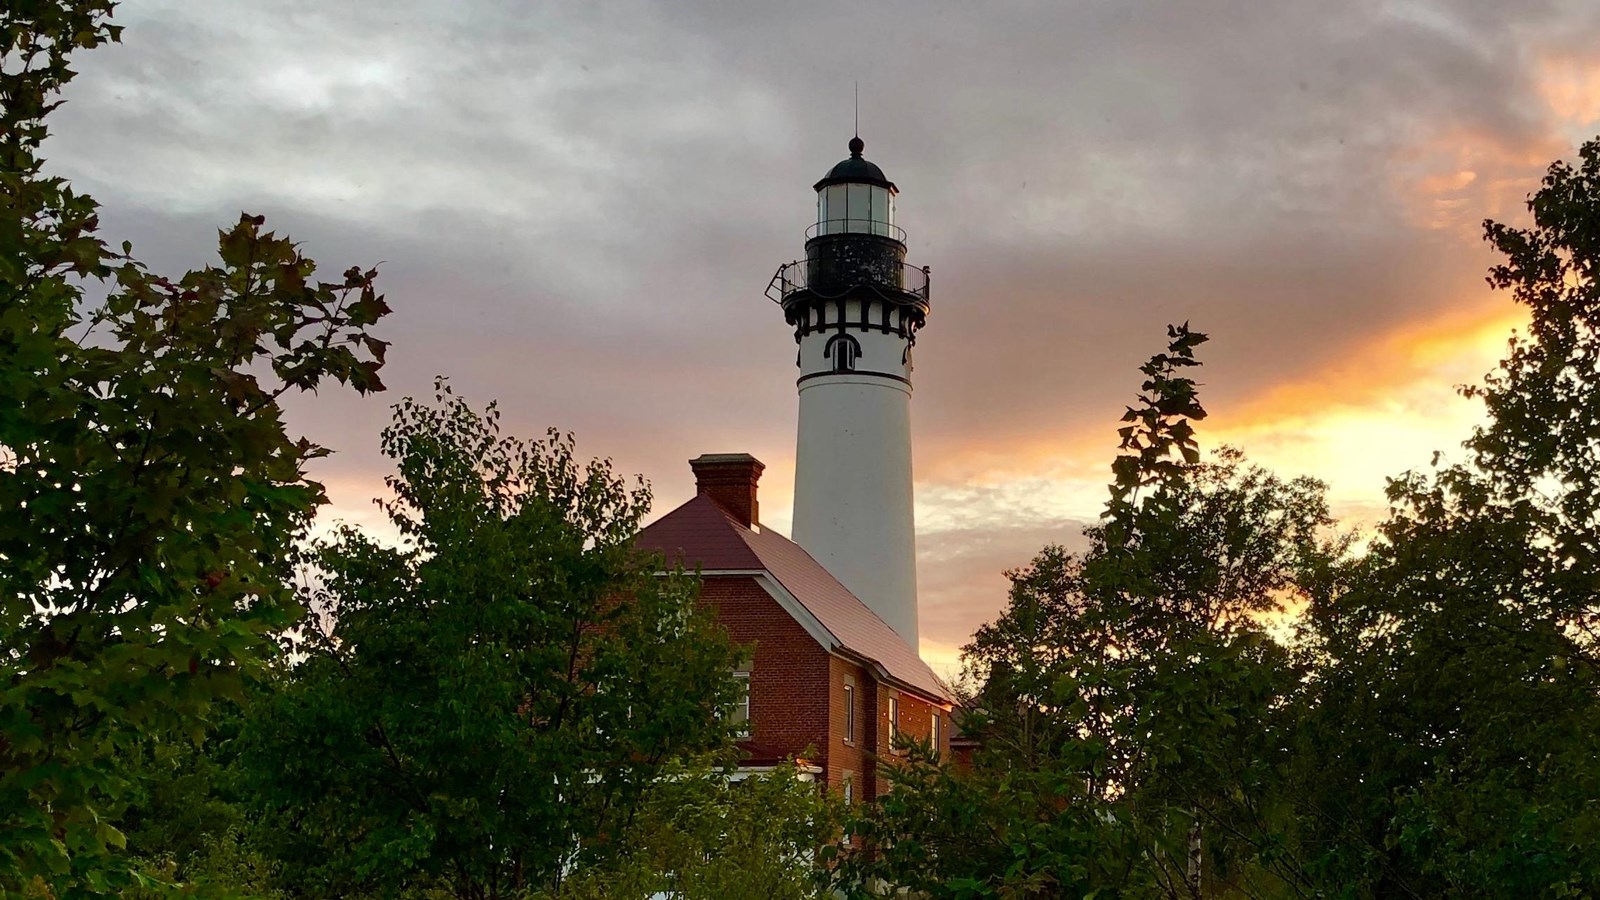 The Au Sable Light Station is an 86 foot tall lighthouse with attached assistant keepers house.